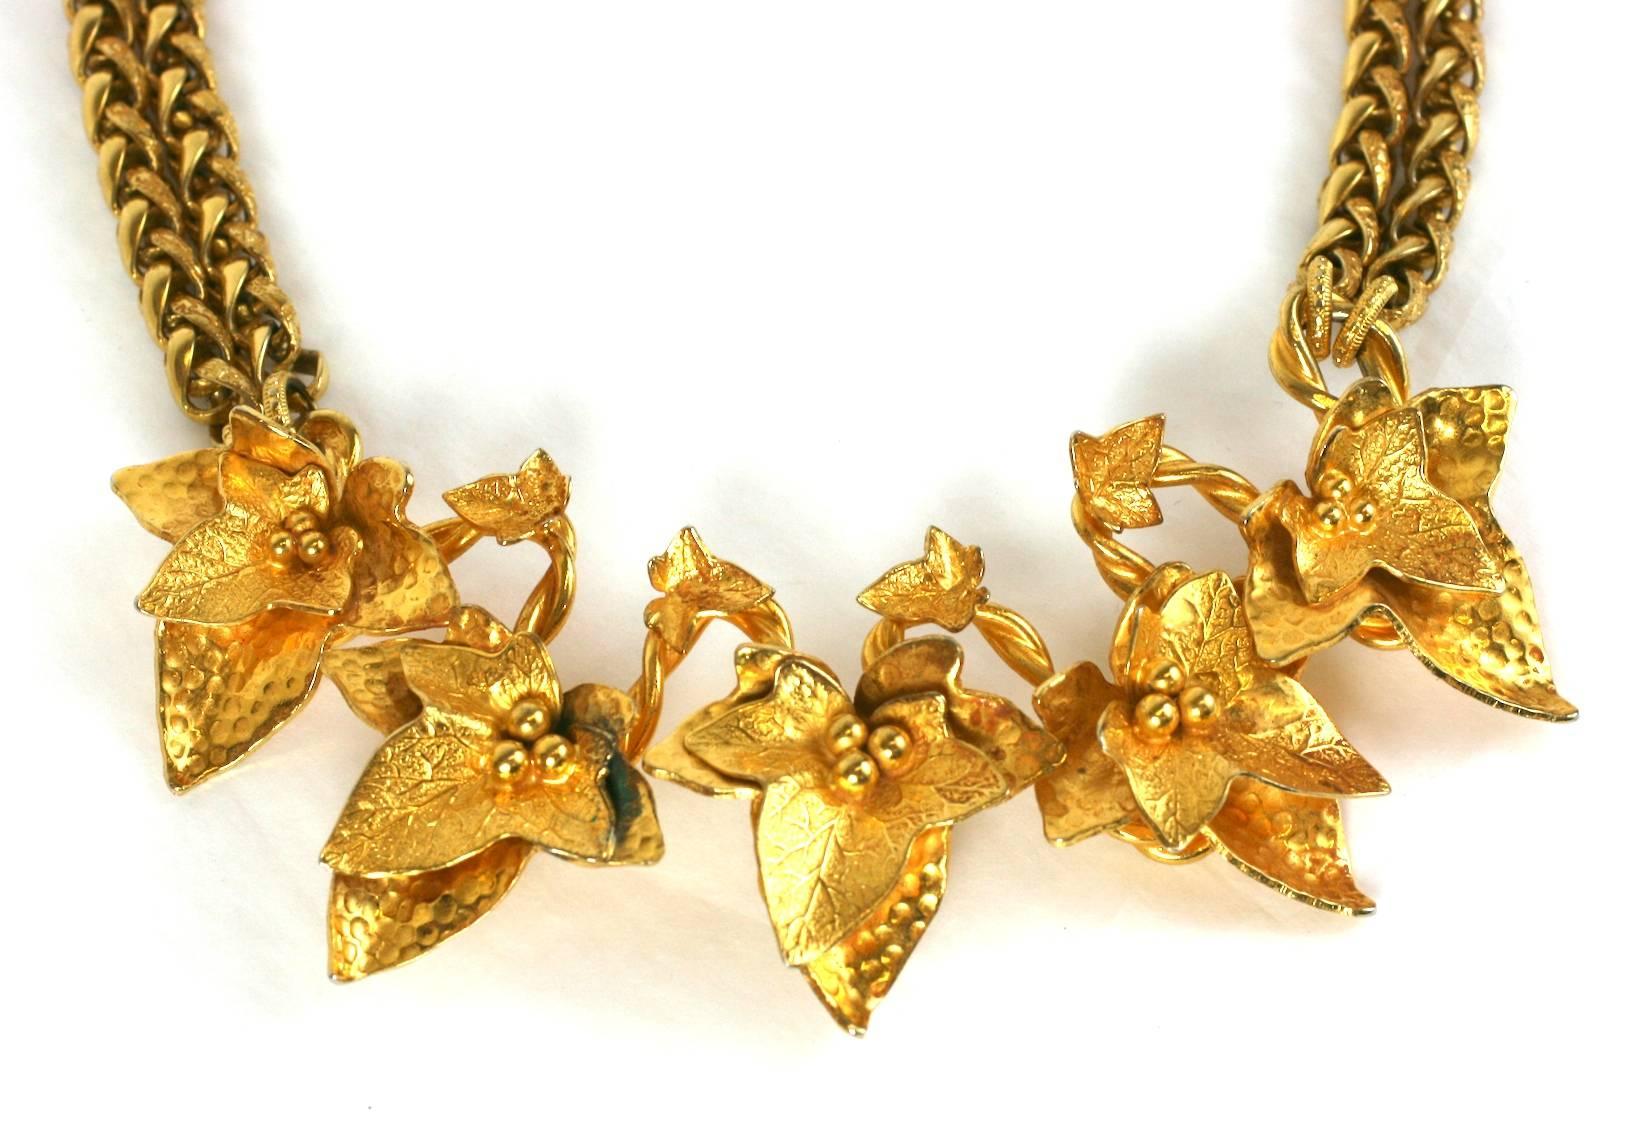 Dominique Aurientis Gilt Ivy Collar with double wheat chain. French designer Dominique Aurientis' powerful, imposing style was a staple during the 1980-90's. There were DA boutiques in Paris and New York, as well as her placement within the finest